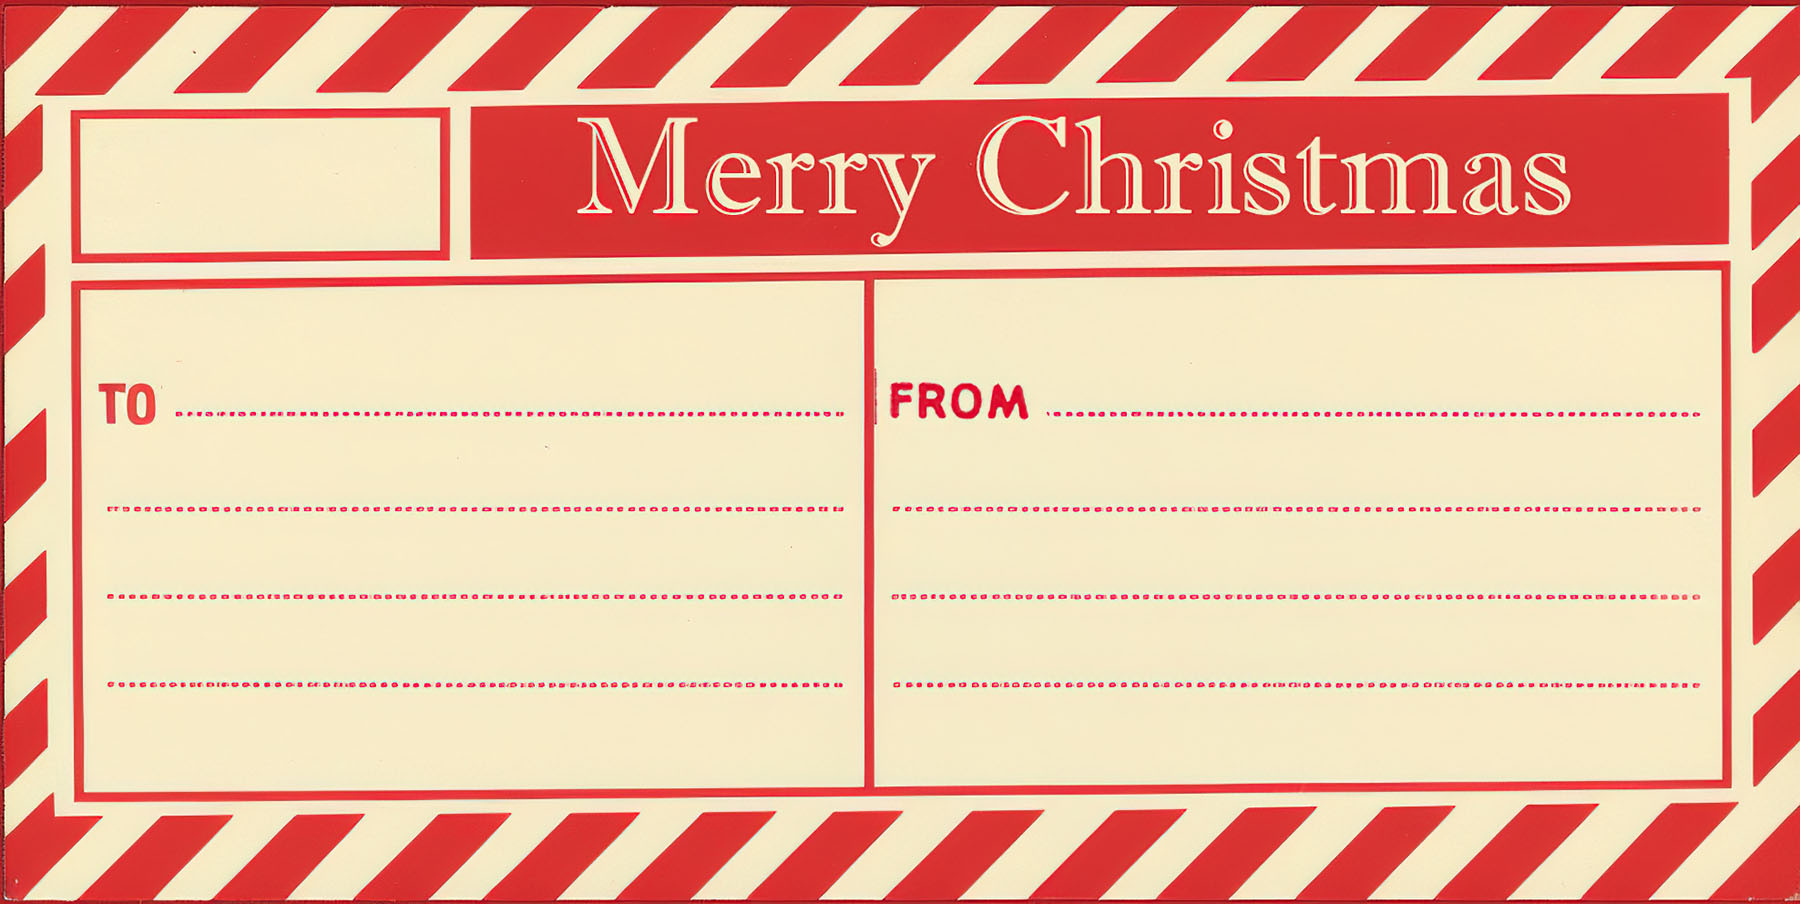 Merry Christmas Postage Label